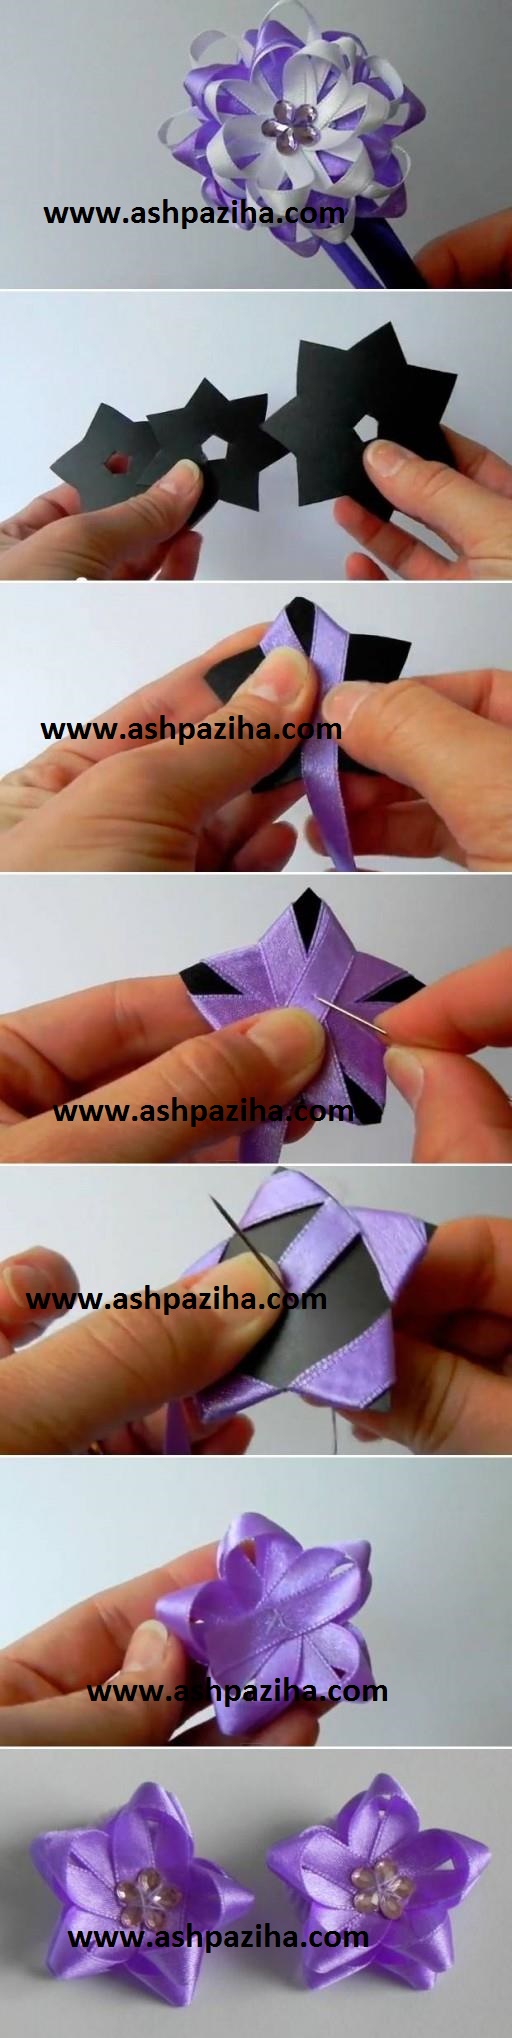 How - with - Ribbons - flowers - decorative - build (3)